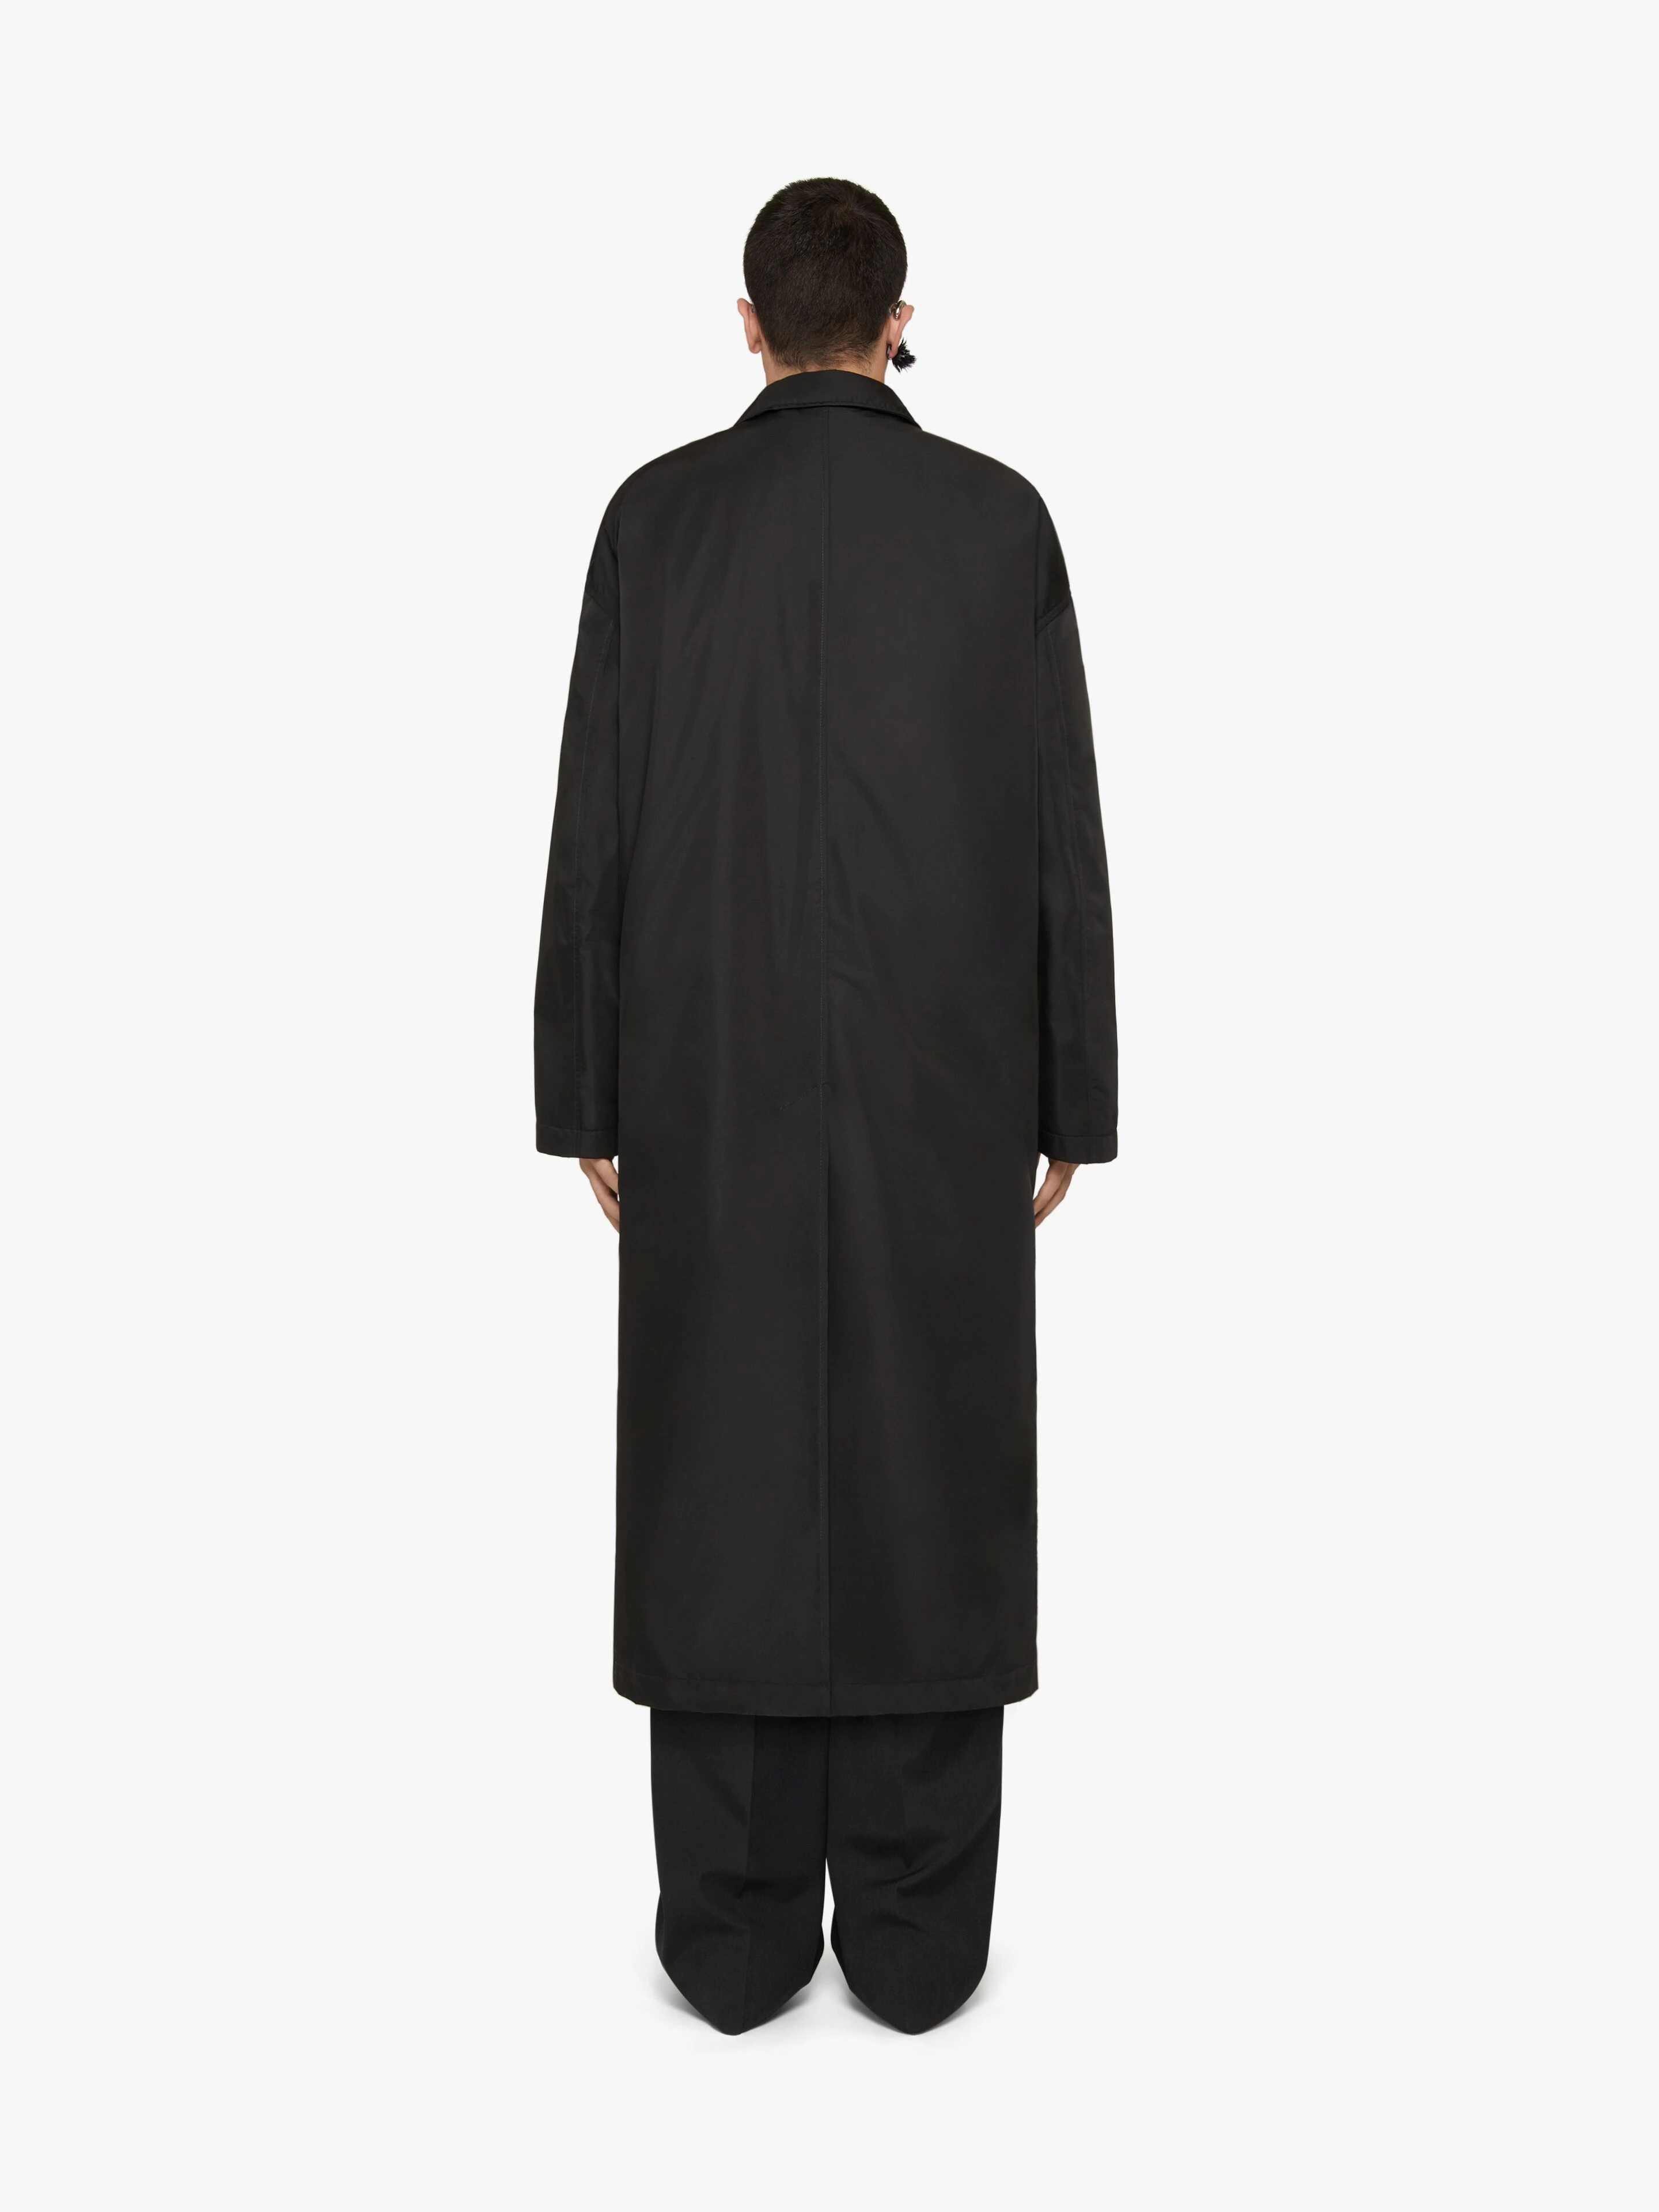 TRENCH COAT IN TECHNICAL NYLON WITH REMOVABLE LINING - 4